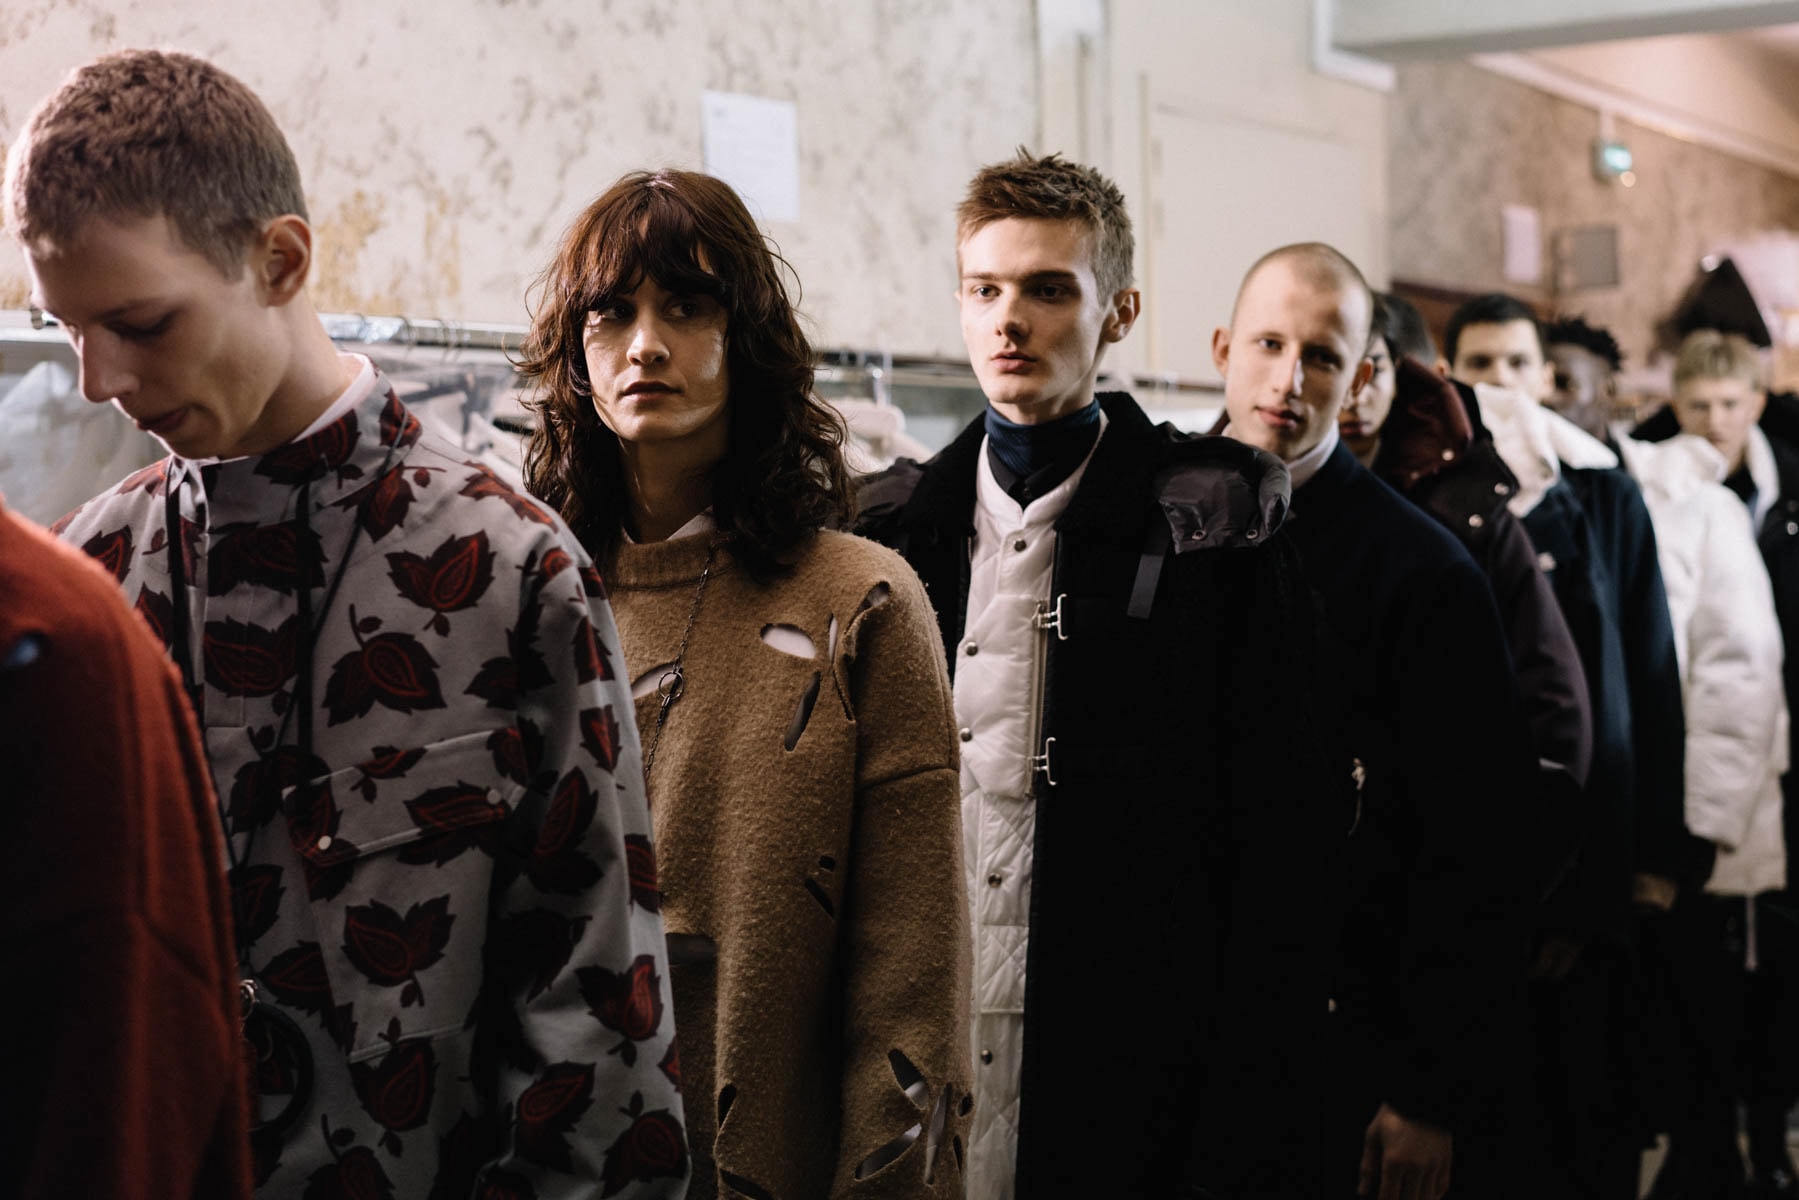 OAMC 2017 Fall Winter Collection Show Backstage